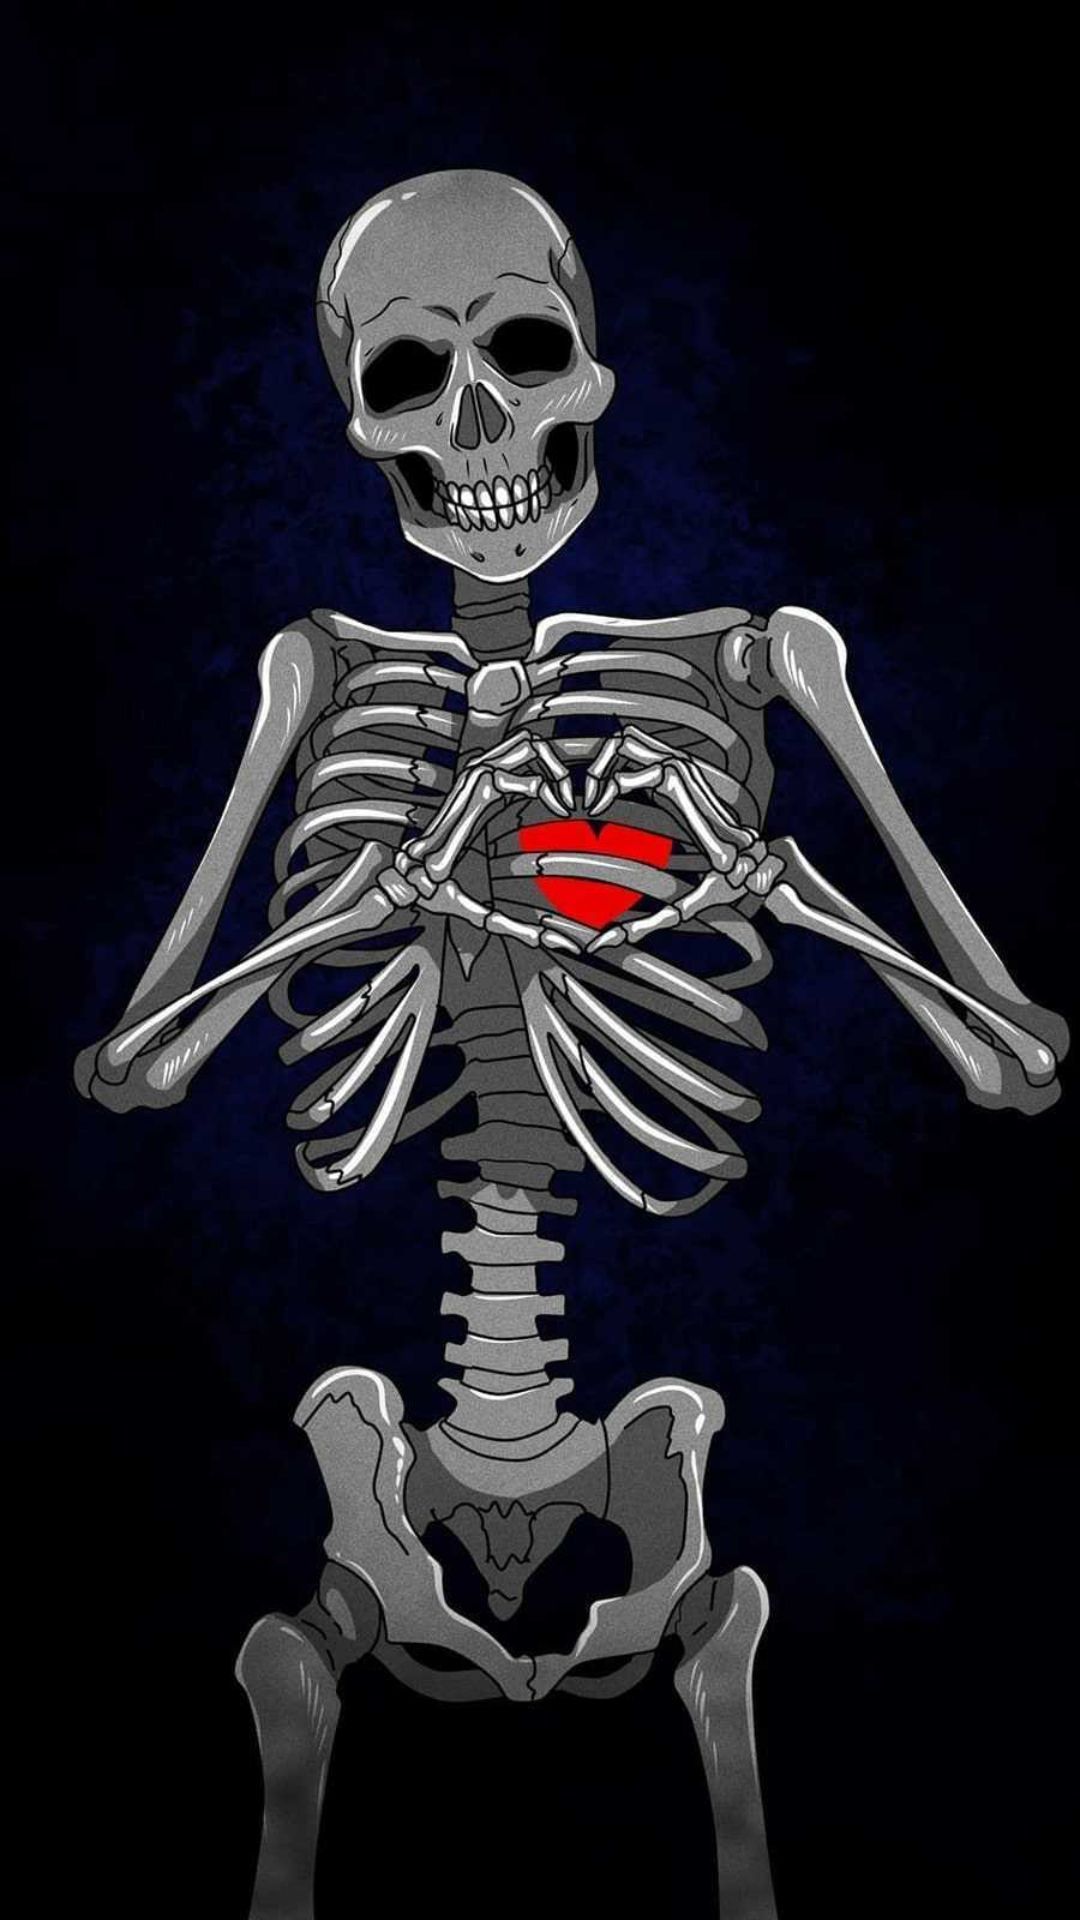 IPhone wallpaper with a skeleton holding a red heart. - Anatomy, skeleton